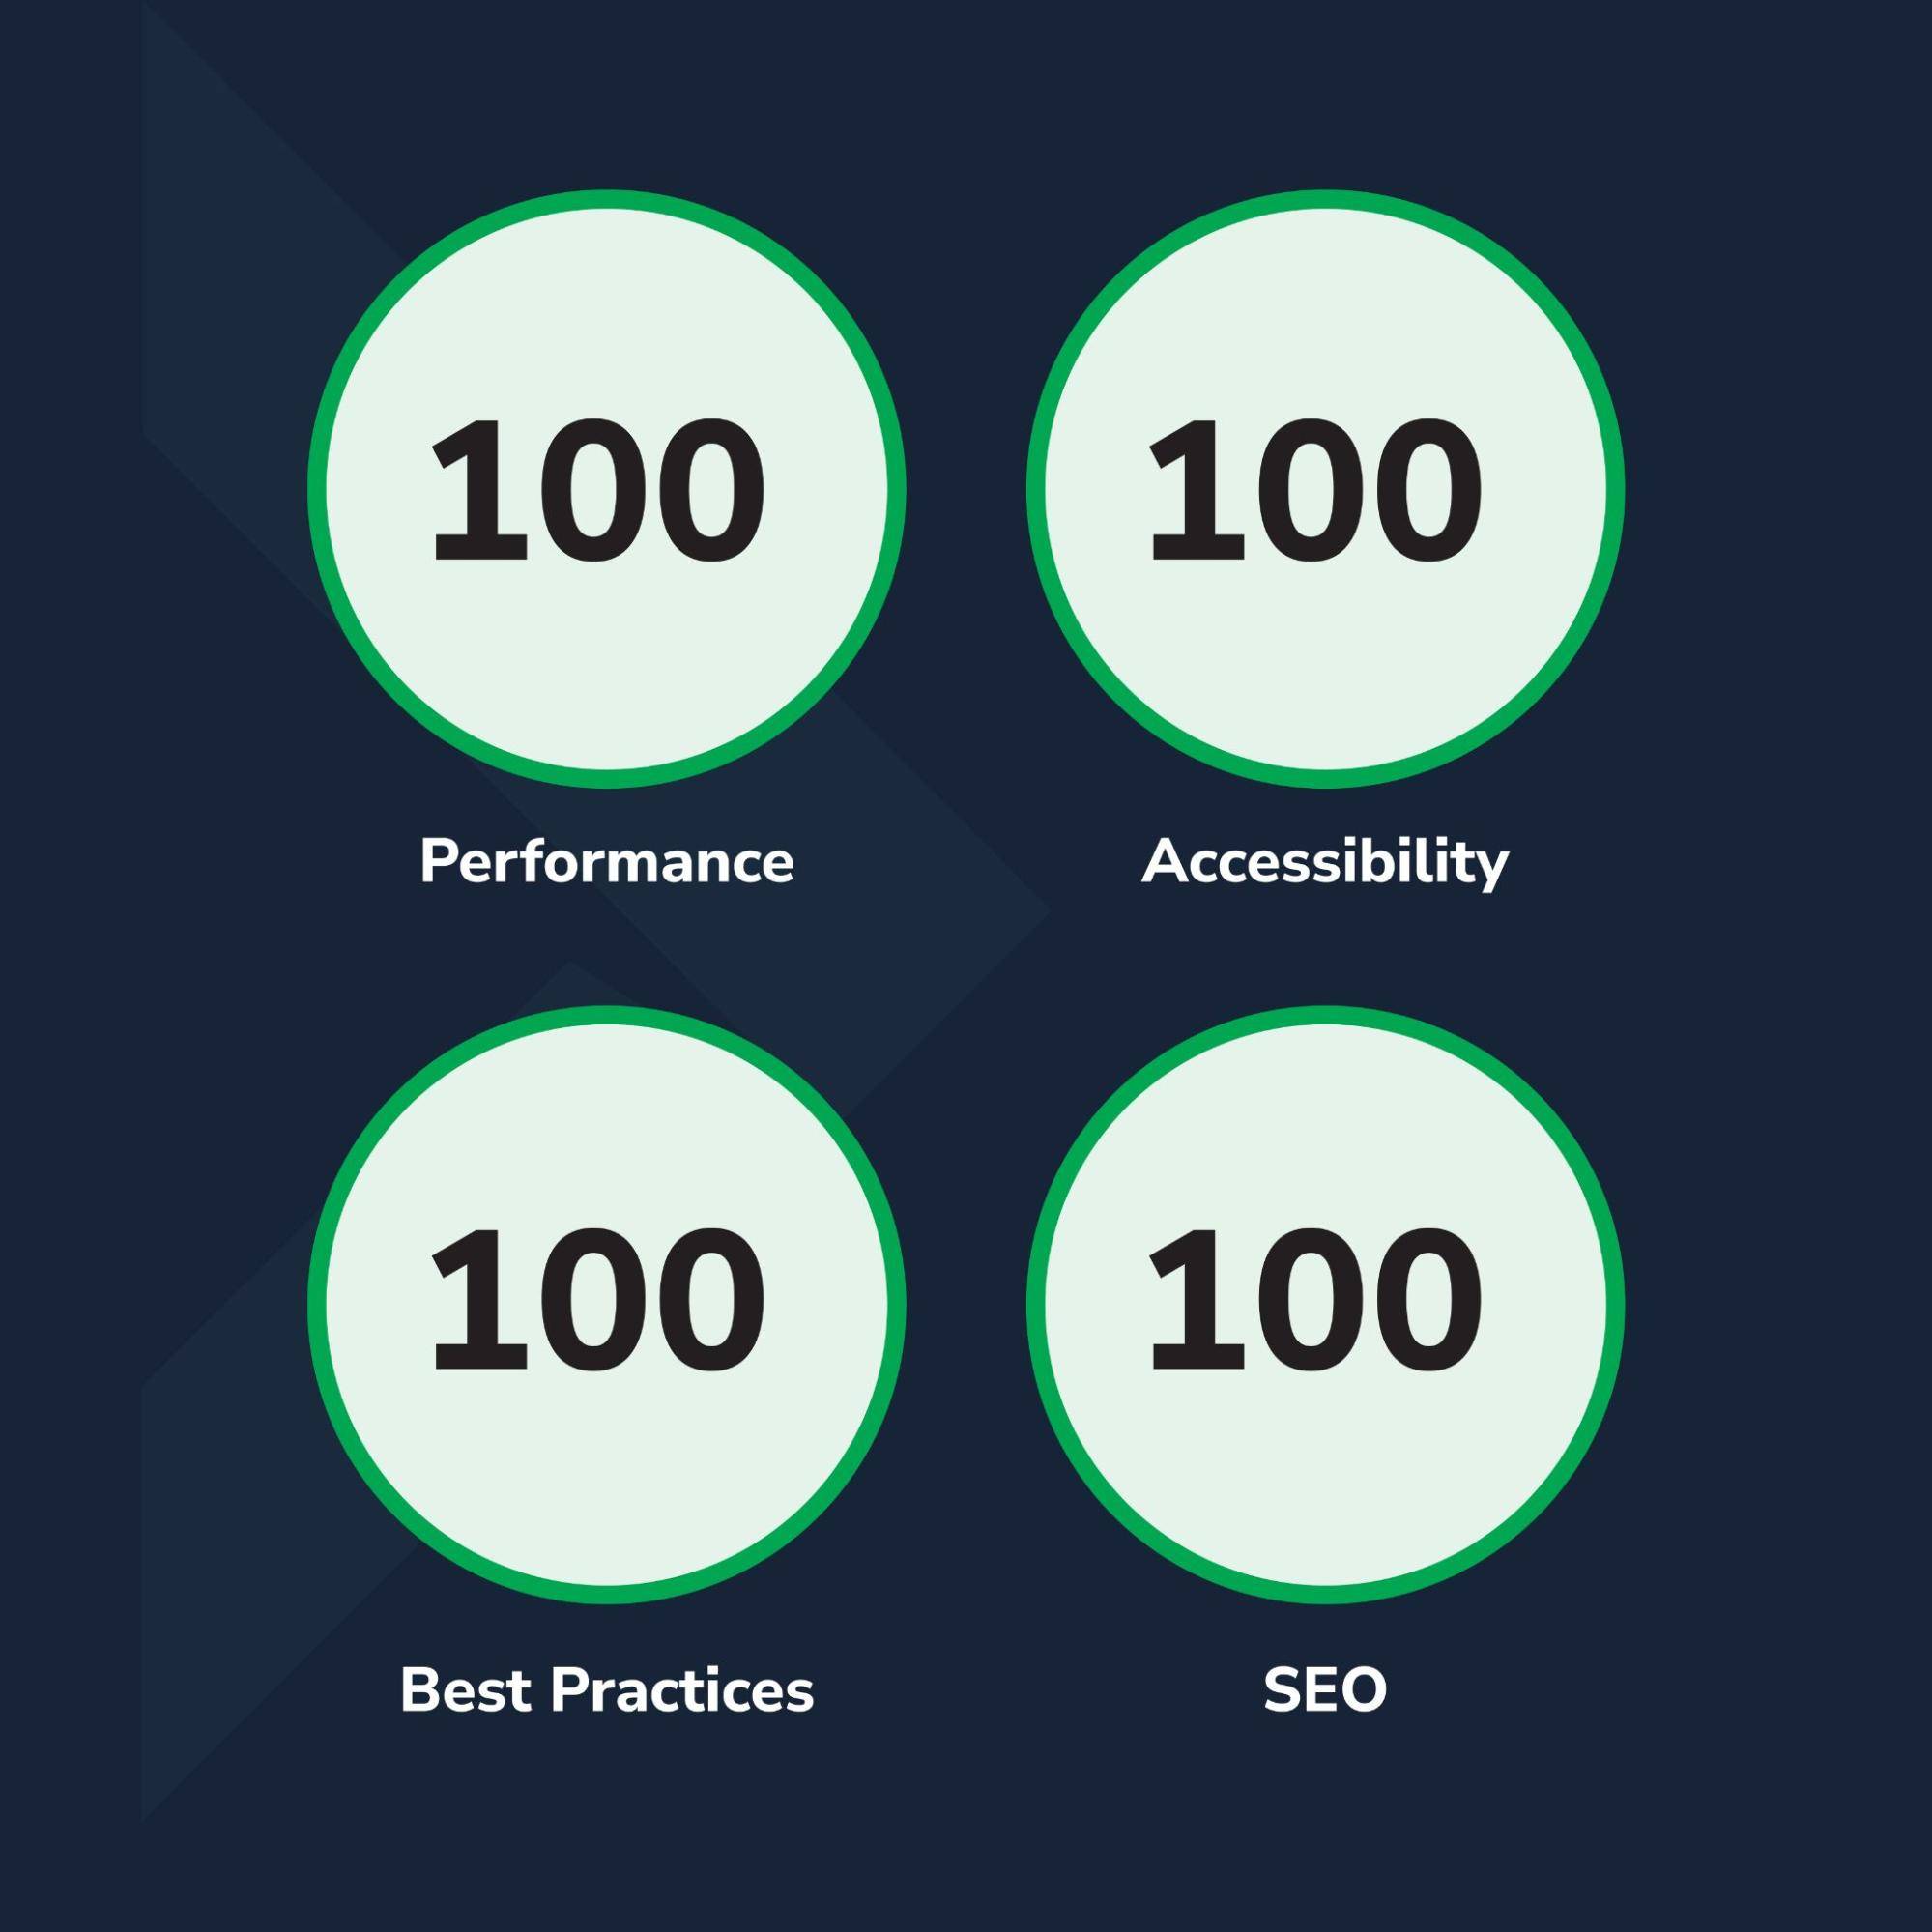 google lighthouse tool evaluates technical performance of a website